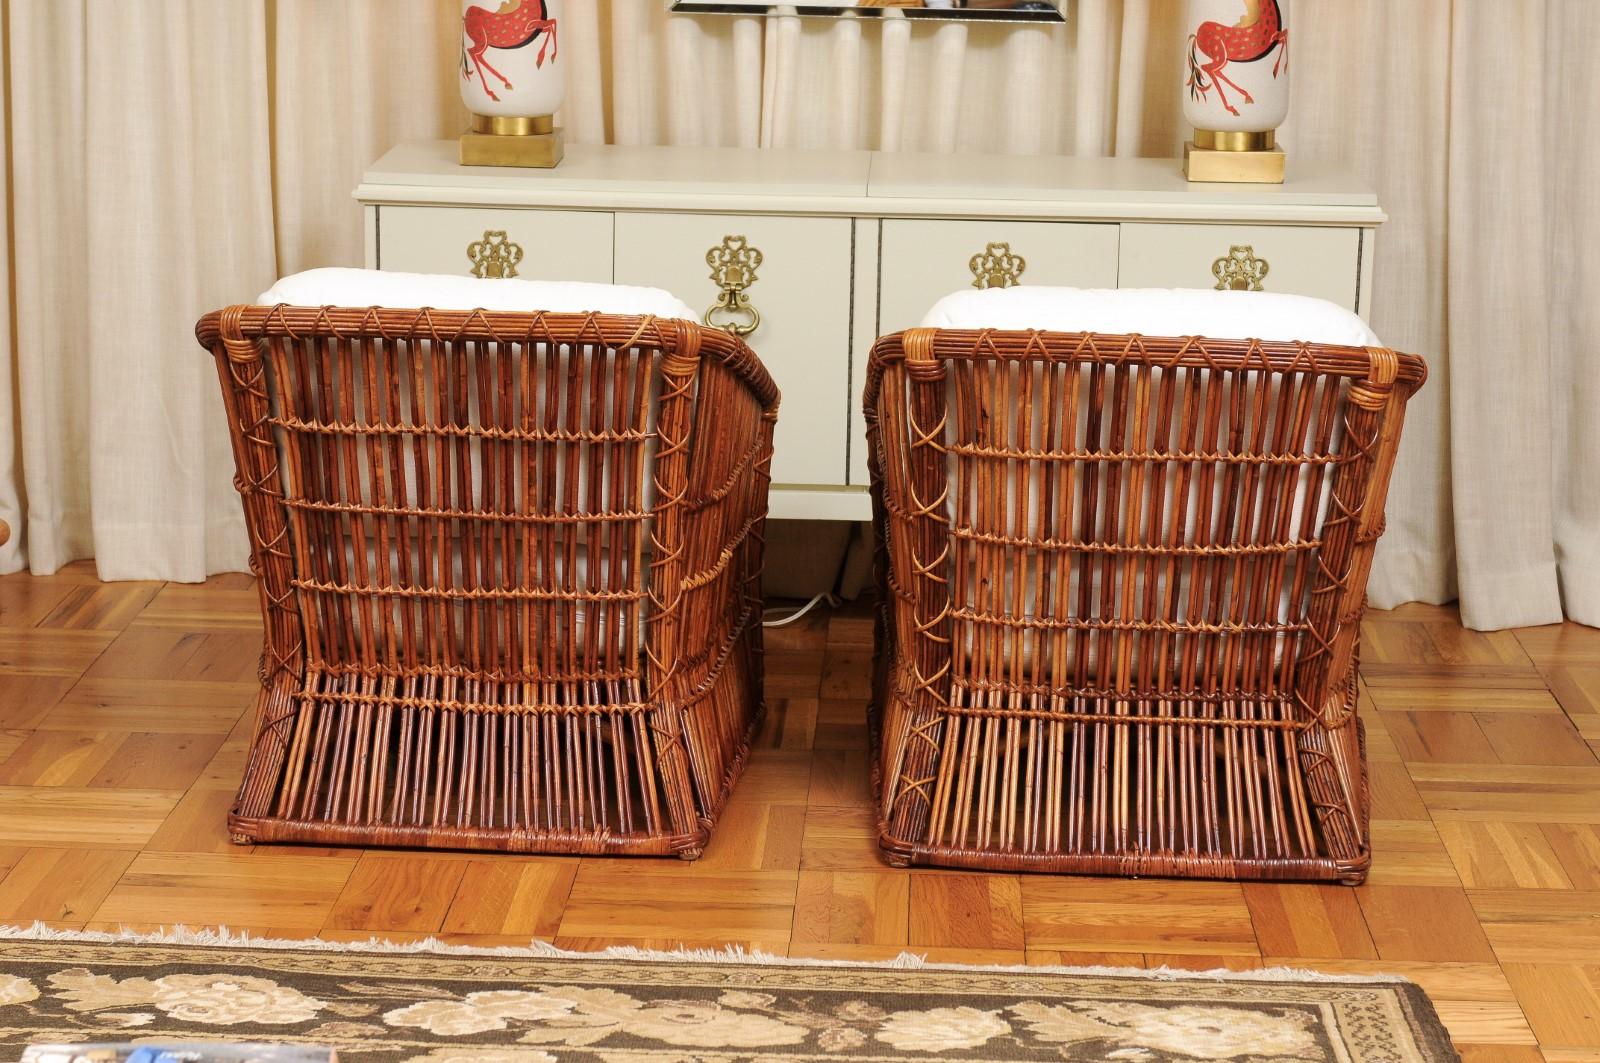 Exceptional Pair of Rattan and Cane Basket Loungers by McGuire, Circa 1975 For Sale 2